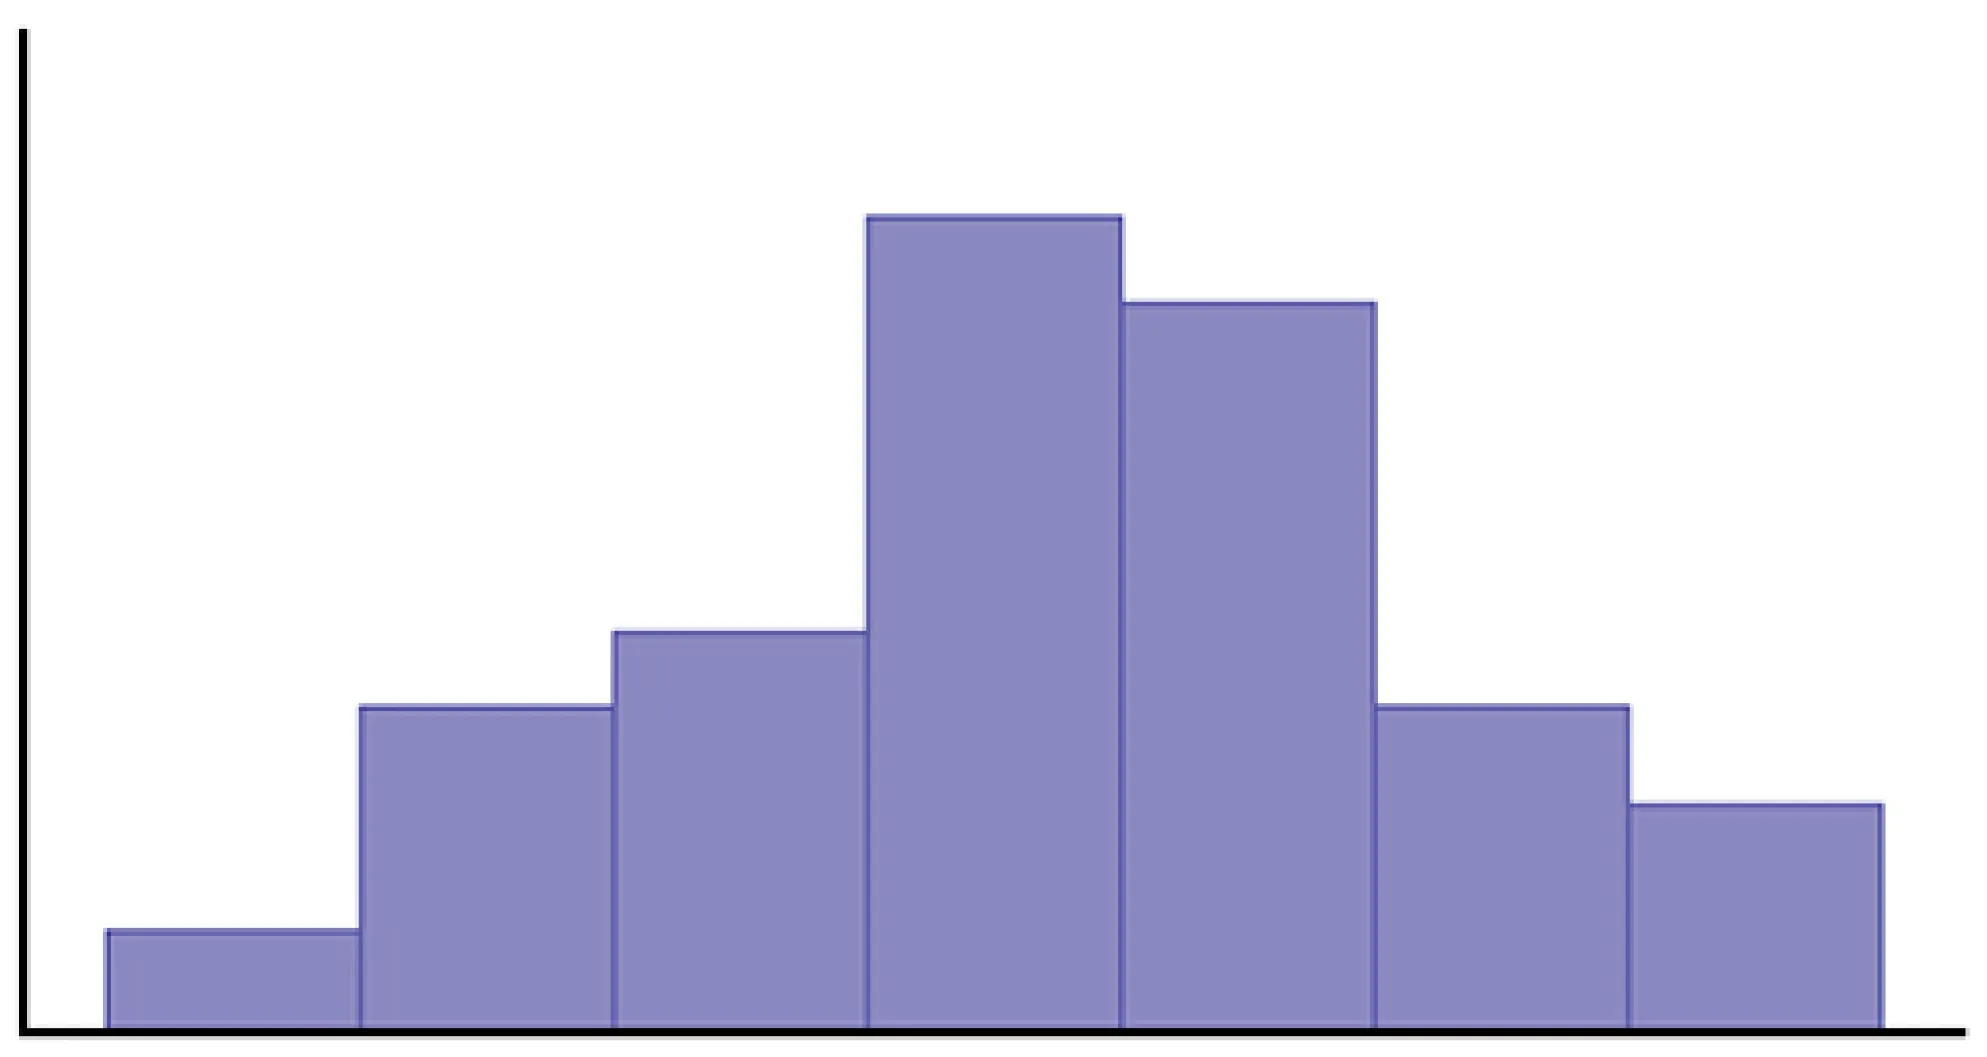 This graph is an unlabeled histogram. The distribution is roughly symmetric. There is a single peak in the center of the graph and heights of bars decrease from that point toward each end of the graph.